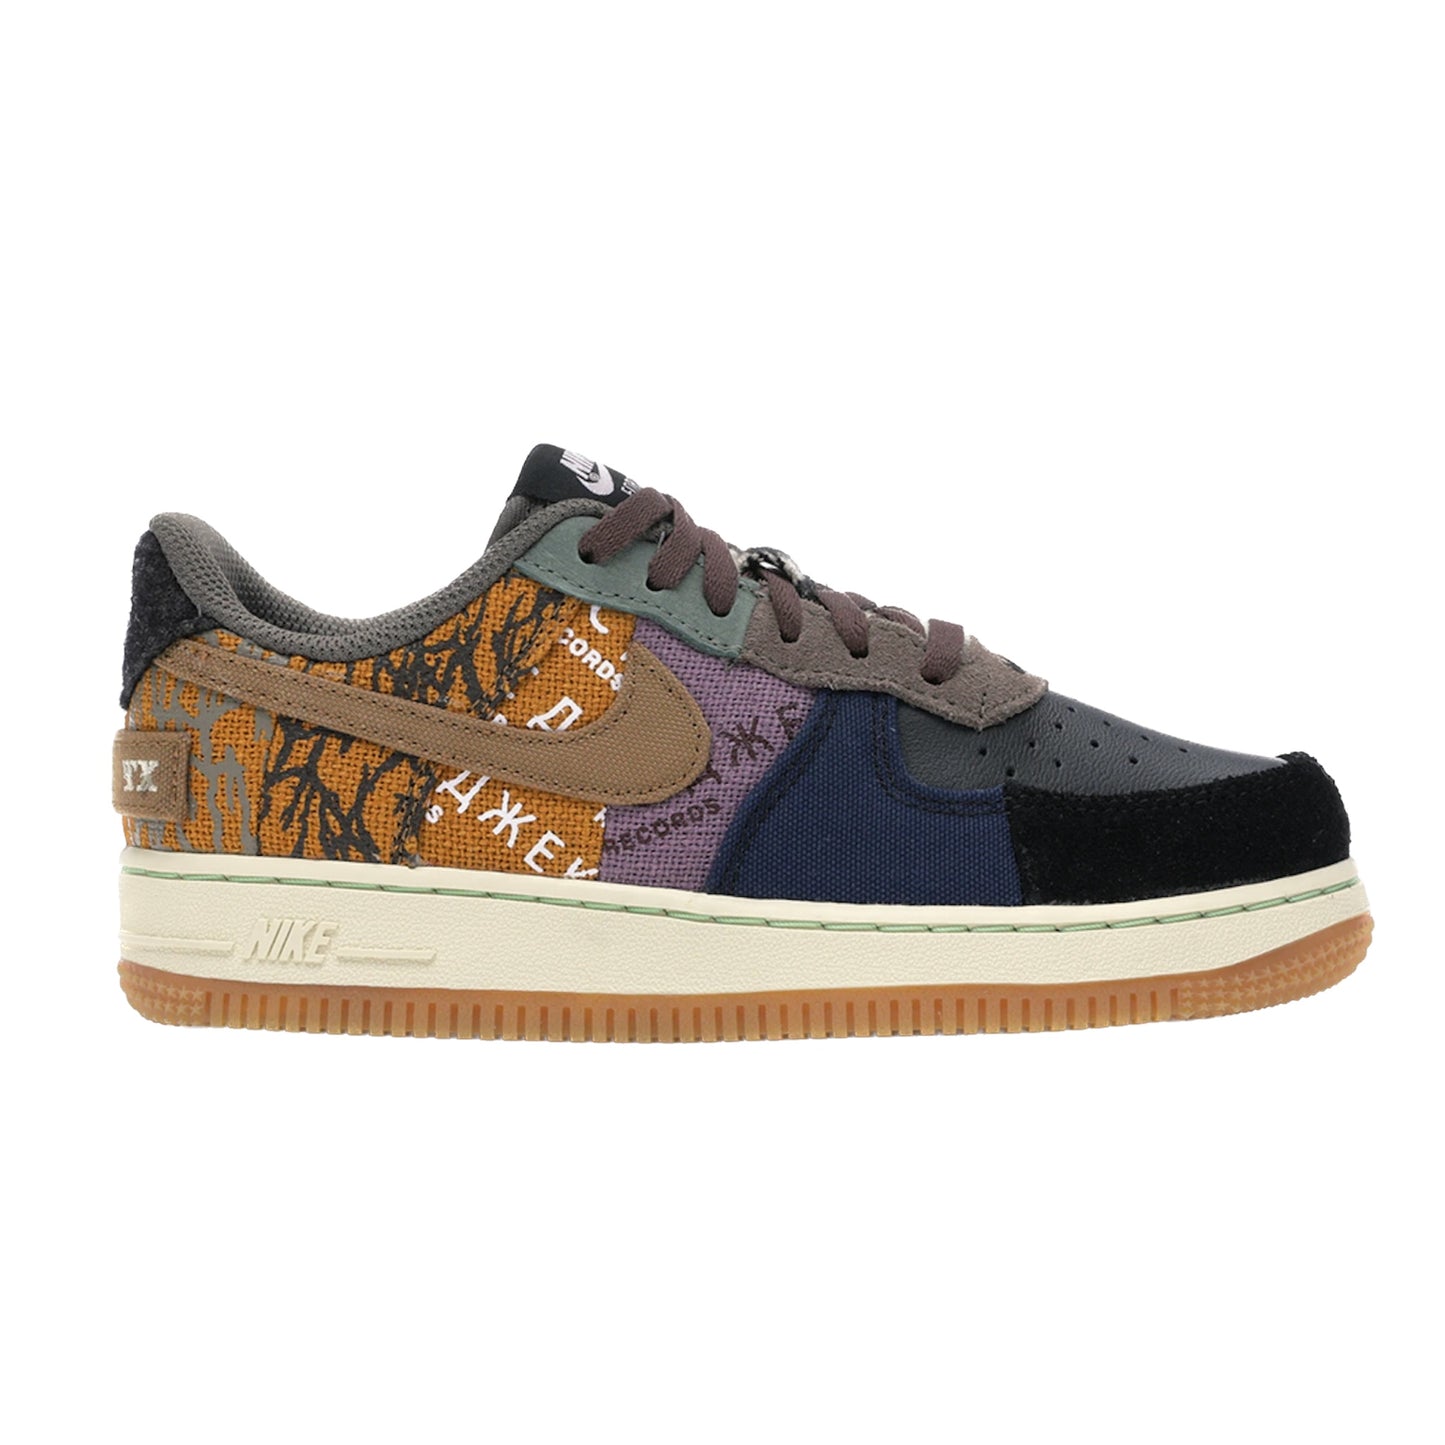 Nike Air Force 1 Low (PS) Travis Scott Cactus Jack Multi-Color Muted Bronze Fossil